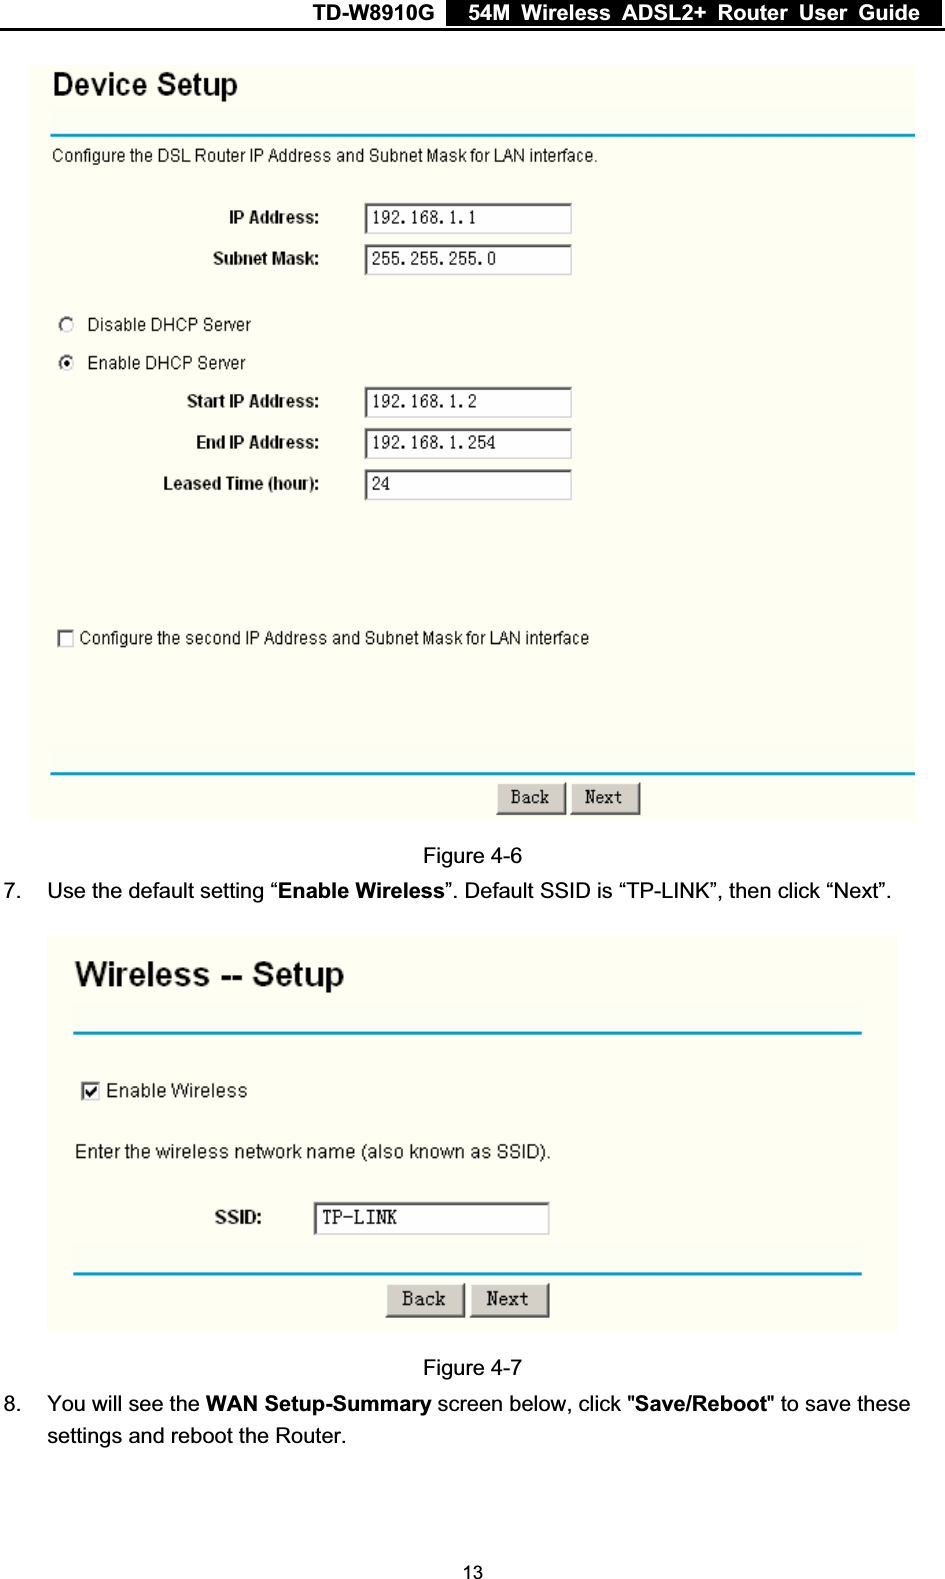 TD-W8910G    54M Wireless ADSL2+ Router User Guide  Figure 4-67.  Use the default setting “Enable Wireless”. Default SSID is “TP-LINK”, then click “Next”. Figure 4-78.  You will see the WAN Setup-Summary screen below, click &quot;Save/Reboot&quot; to save these settings and reboot the Router.  13